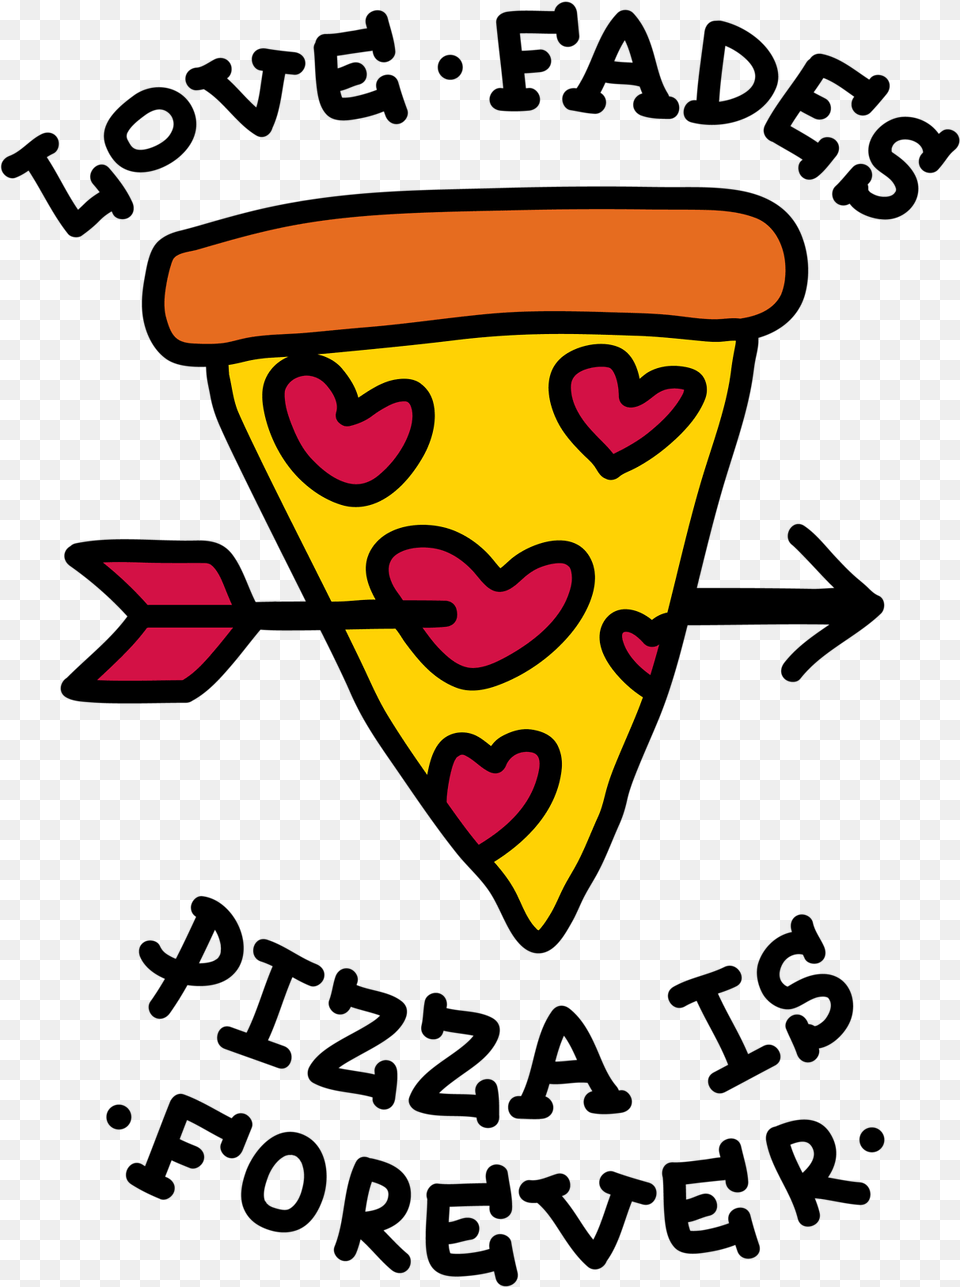 Love Fades Pizza Is Forever, Accessories, Dynamite, Weapon Png Image